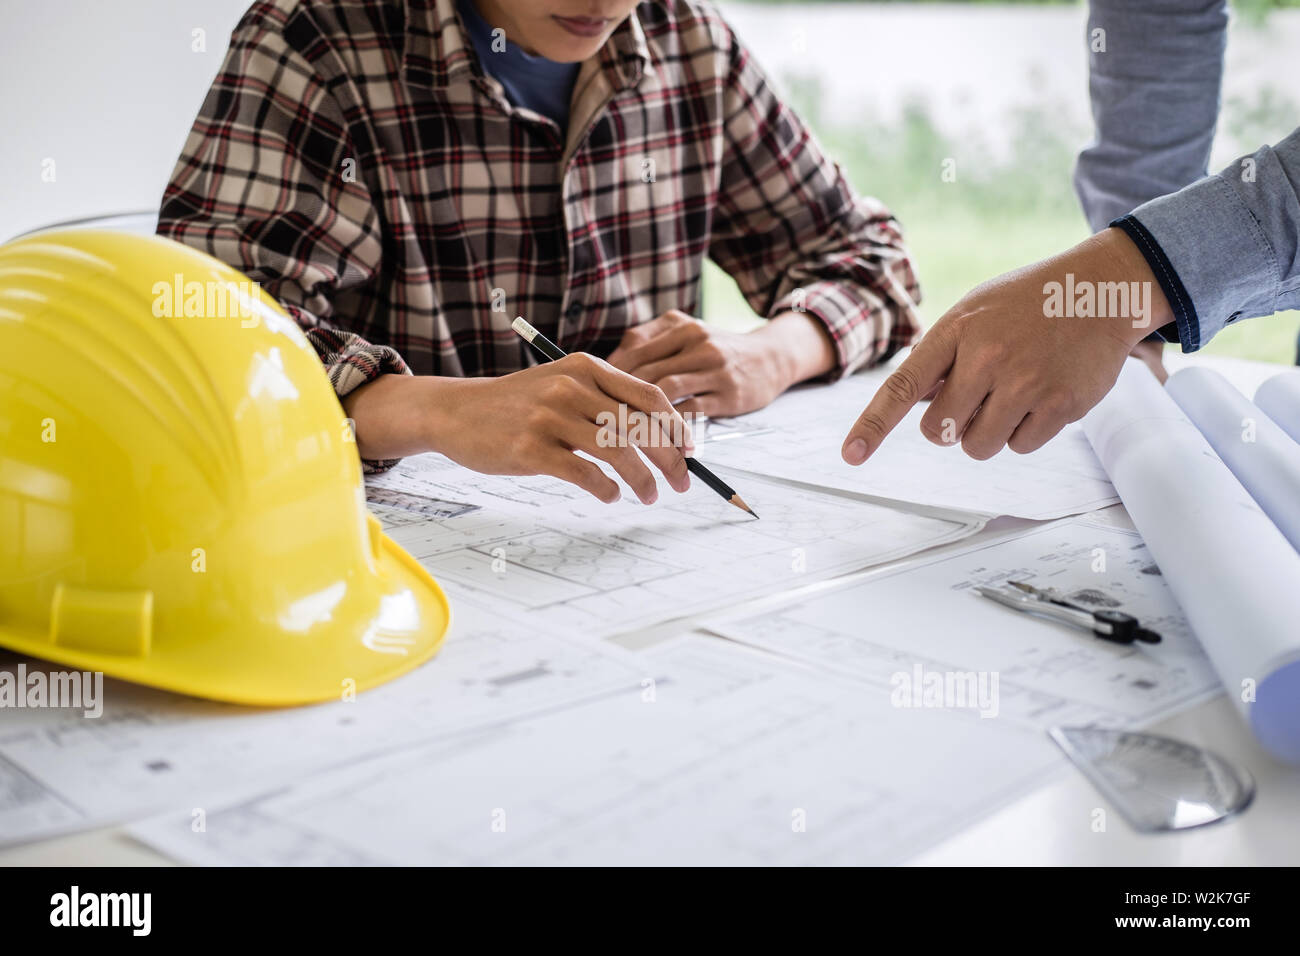 Construction engineering or architect discuss a blueprint while checking information on drawing and sketching meeting for architectural project in wor Stock Photo